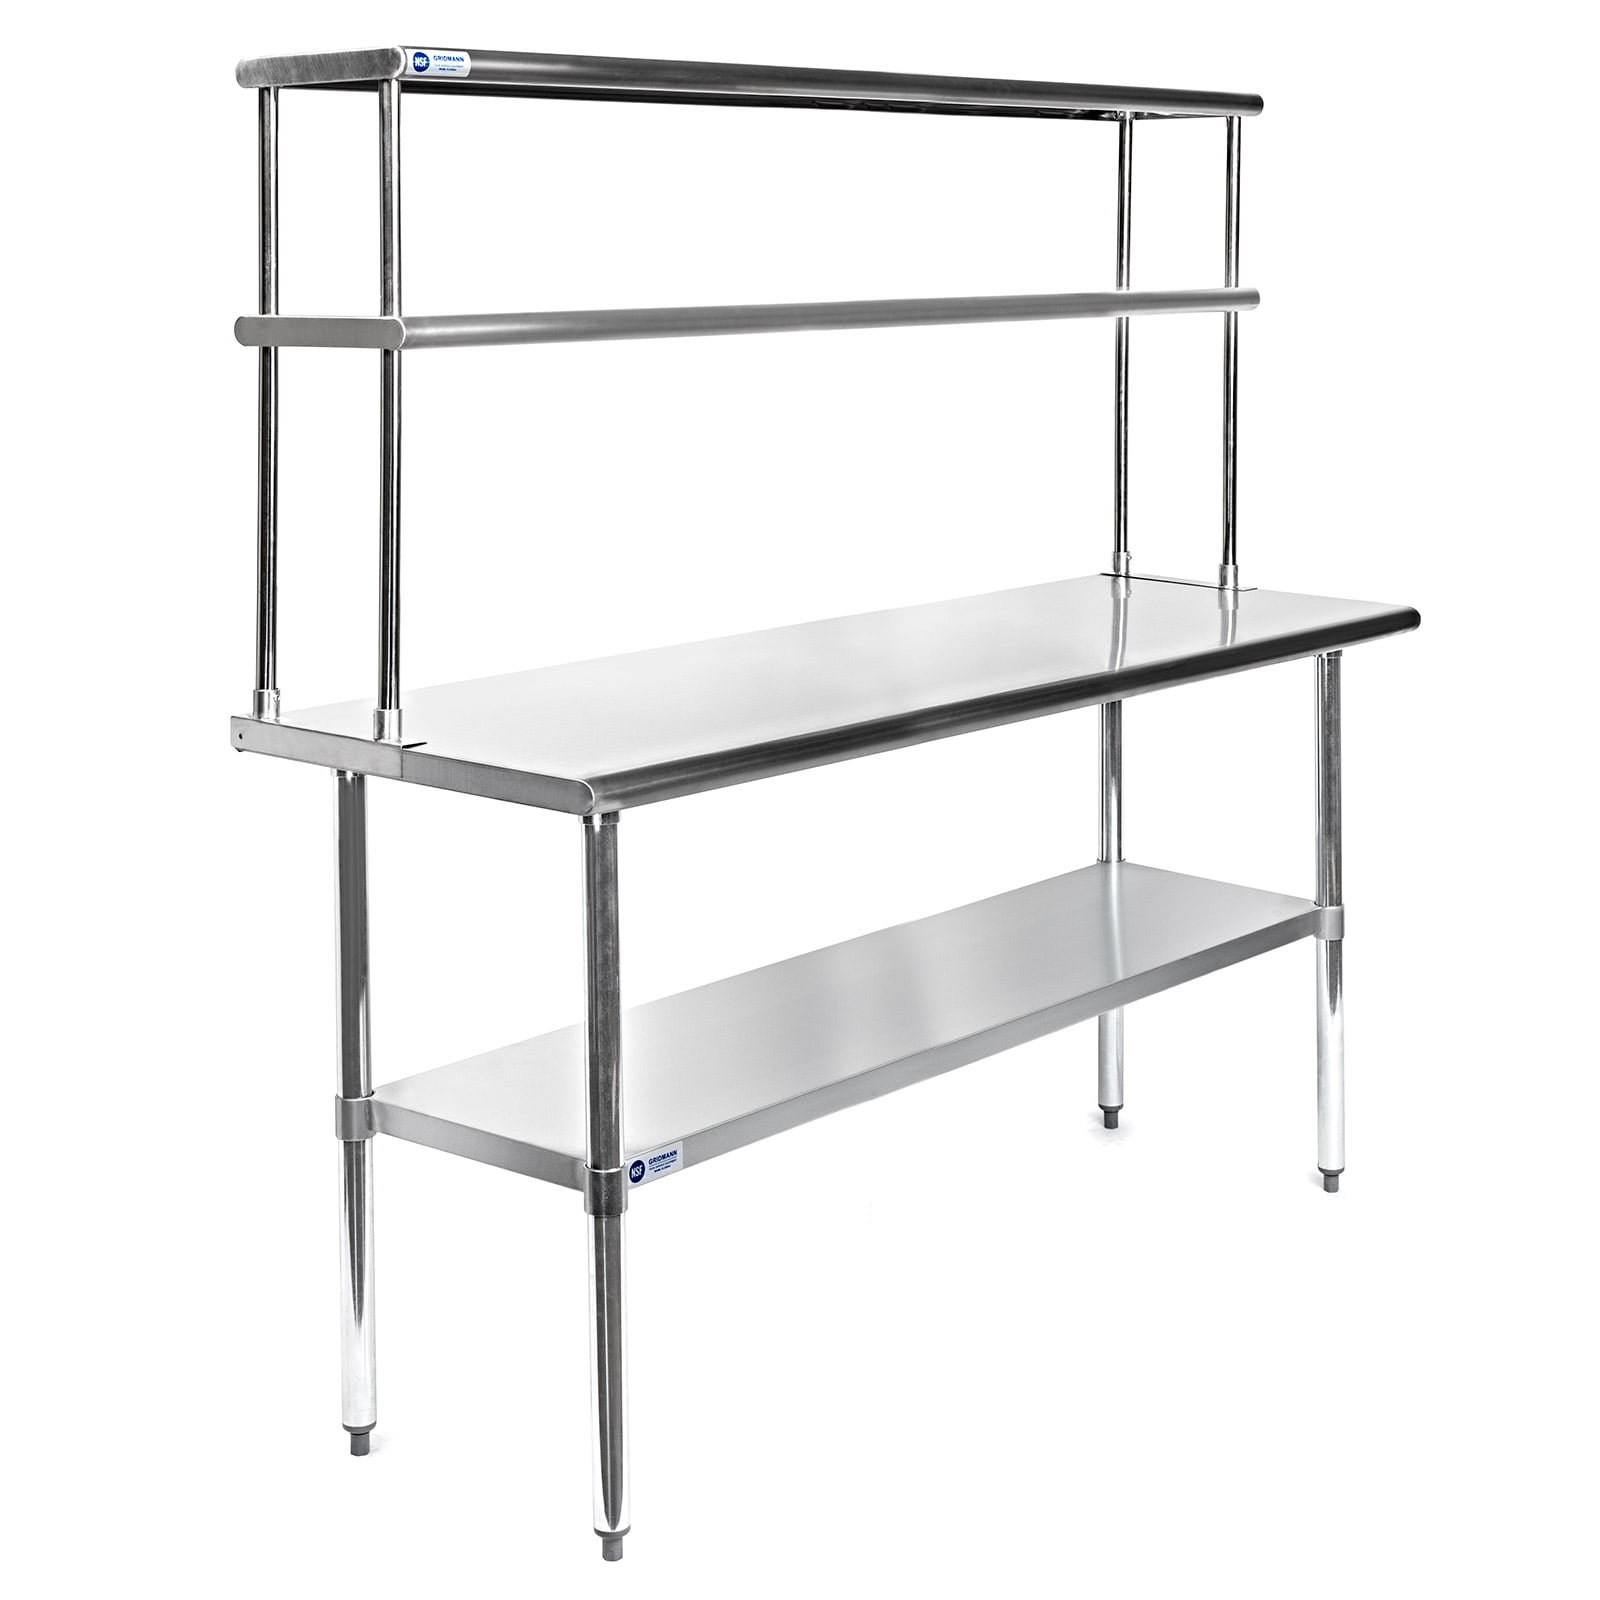 1/2 Tier Commercial Kitchen Stainless Steel Over Shelf for Prep Table Bench Rack 